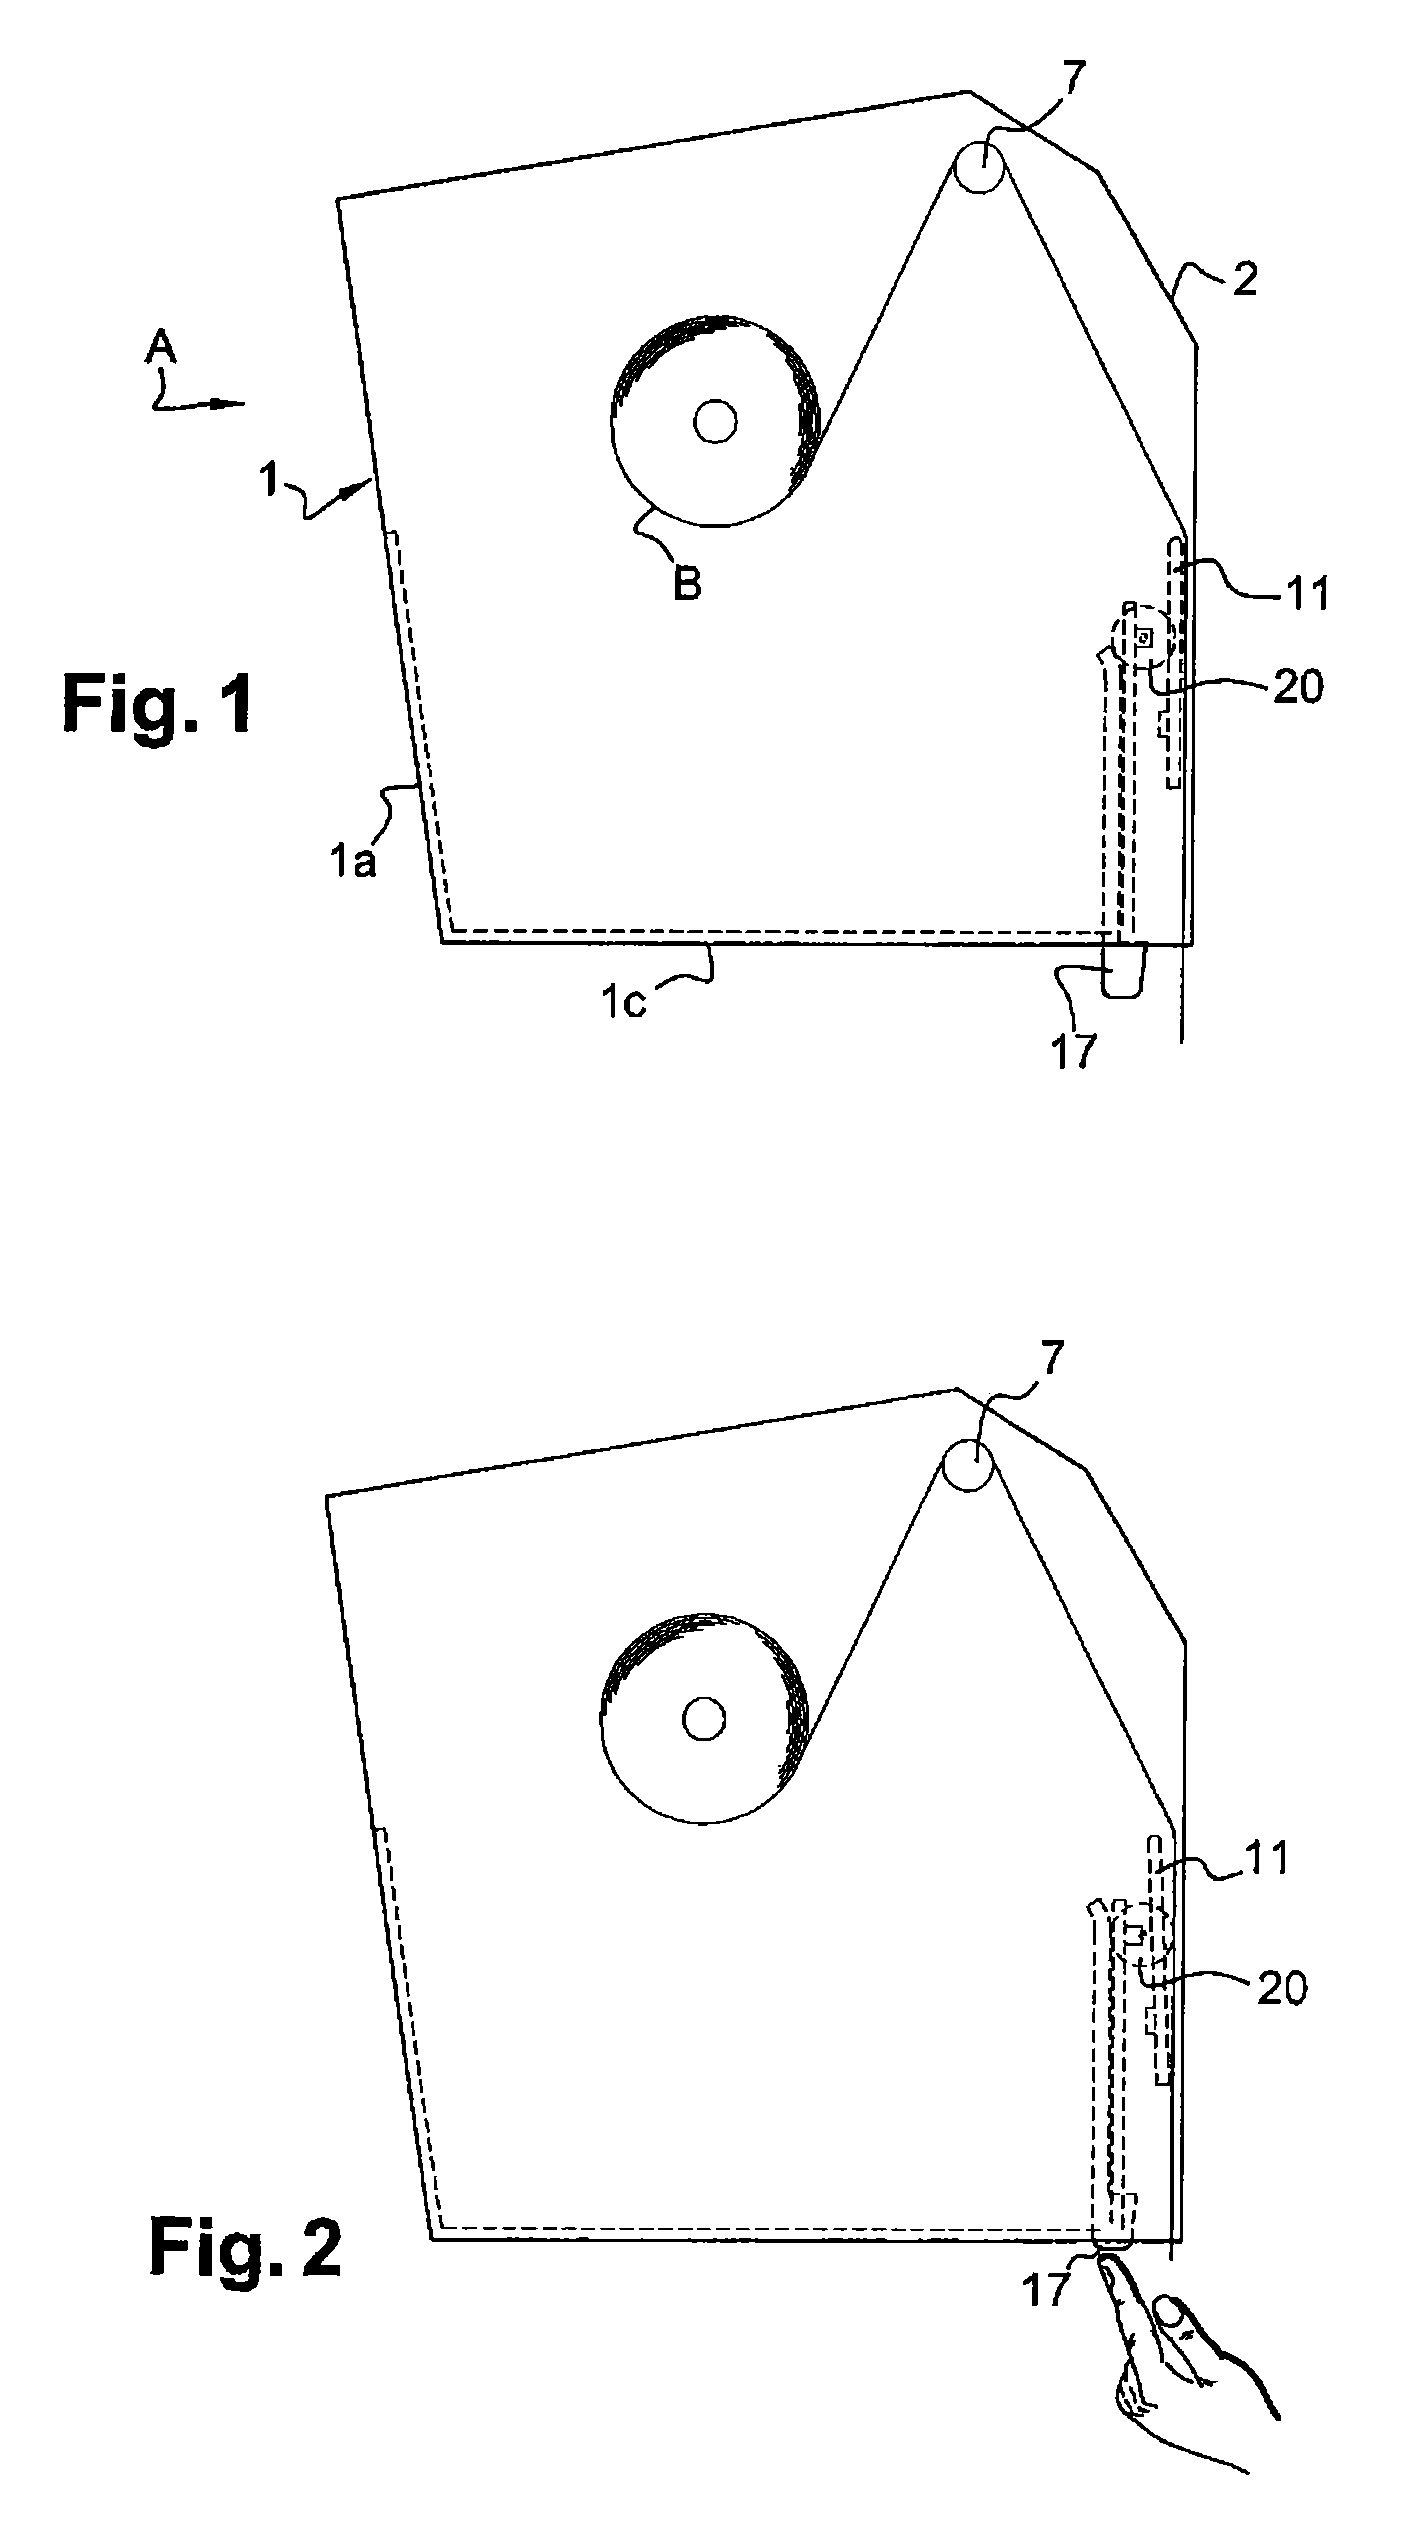 Appliance for distributing a precut wiping material that is rolled up or folded in a Z shape